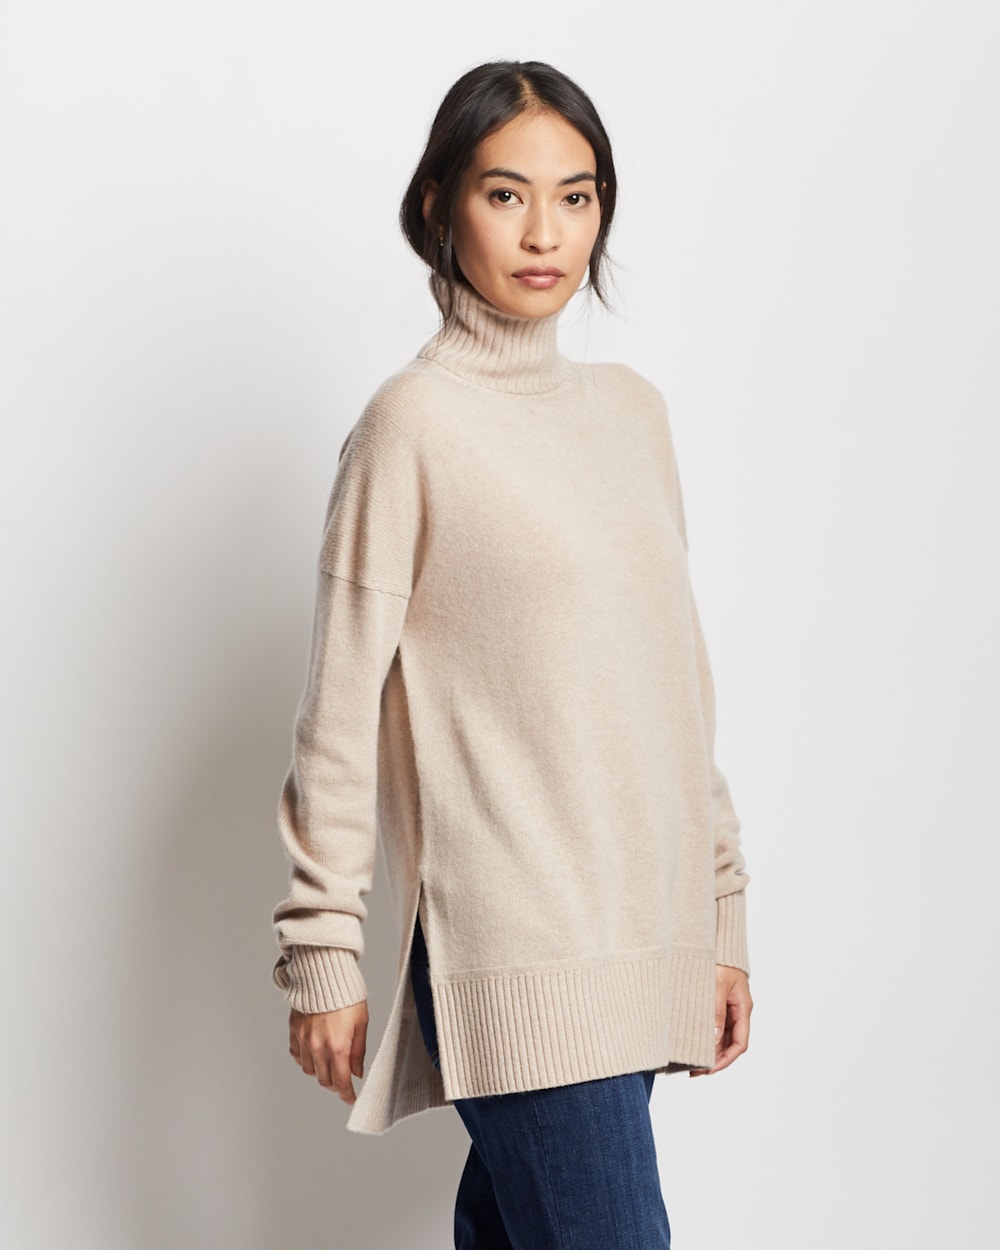 ALTERNATE VIEW OF WOMEN'S MERINO/CASHMERE OVERSIZED TURTLENECK IN WHEAT image number 4